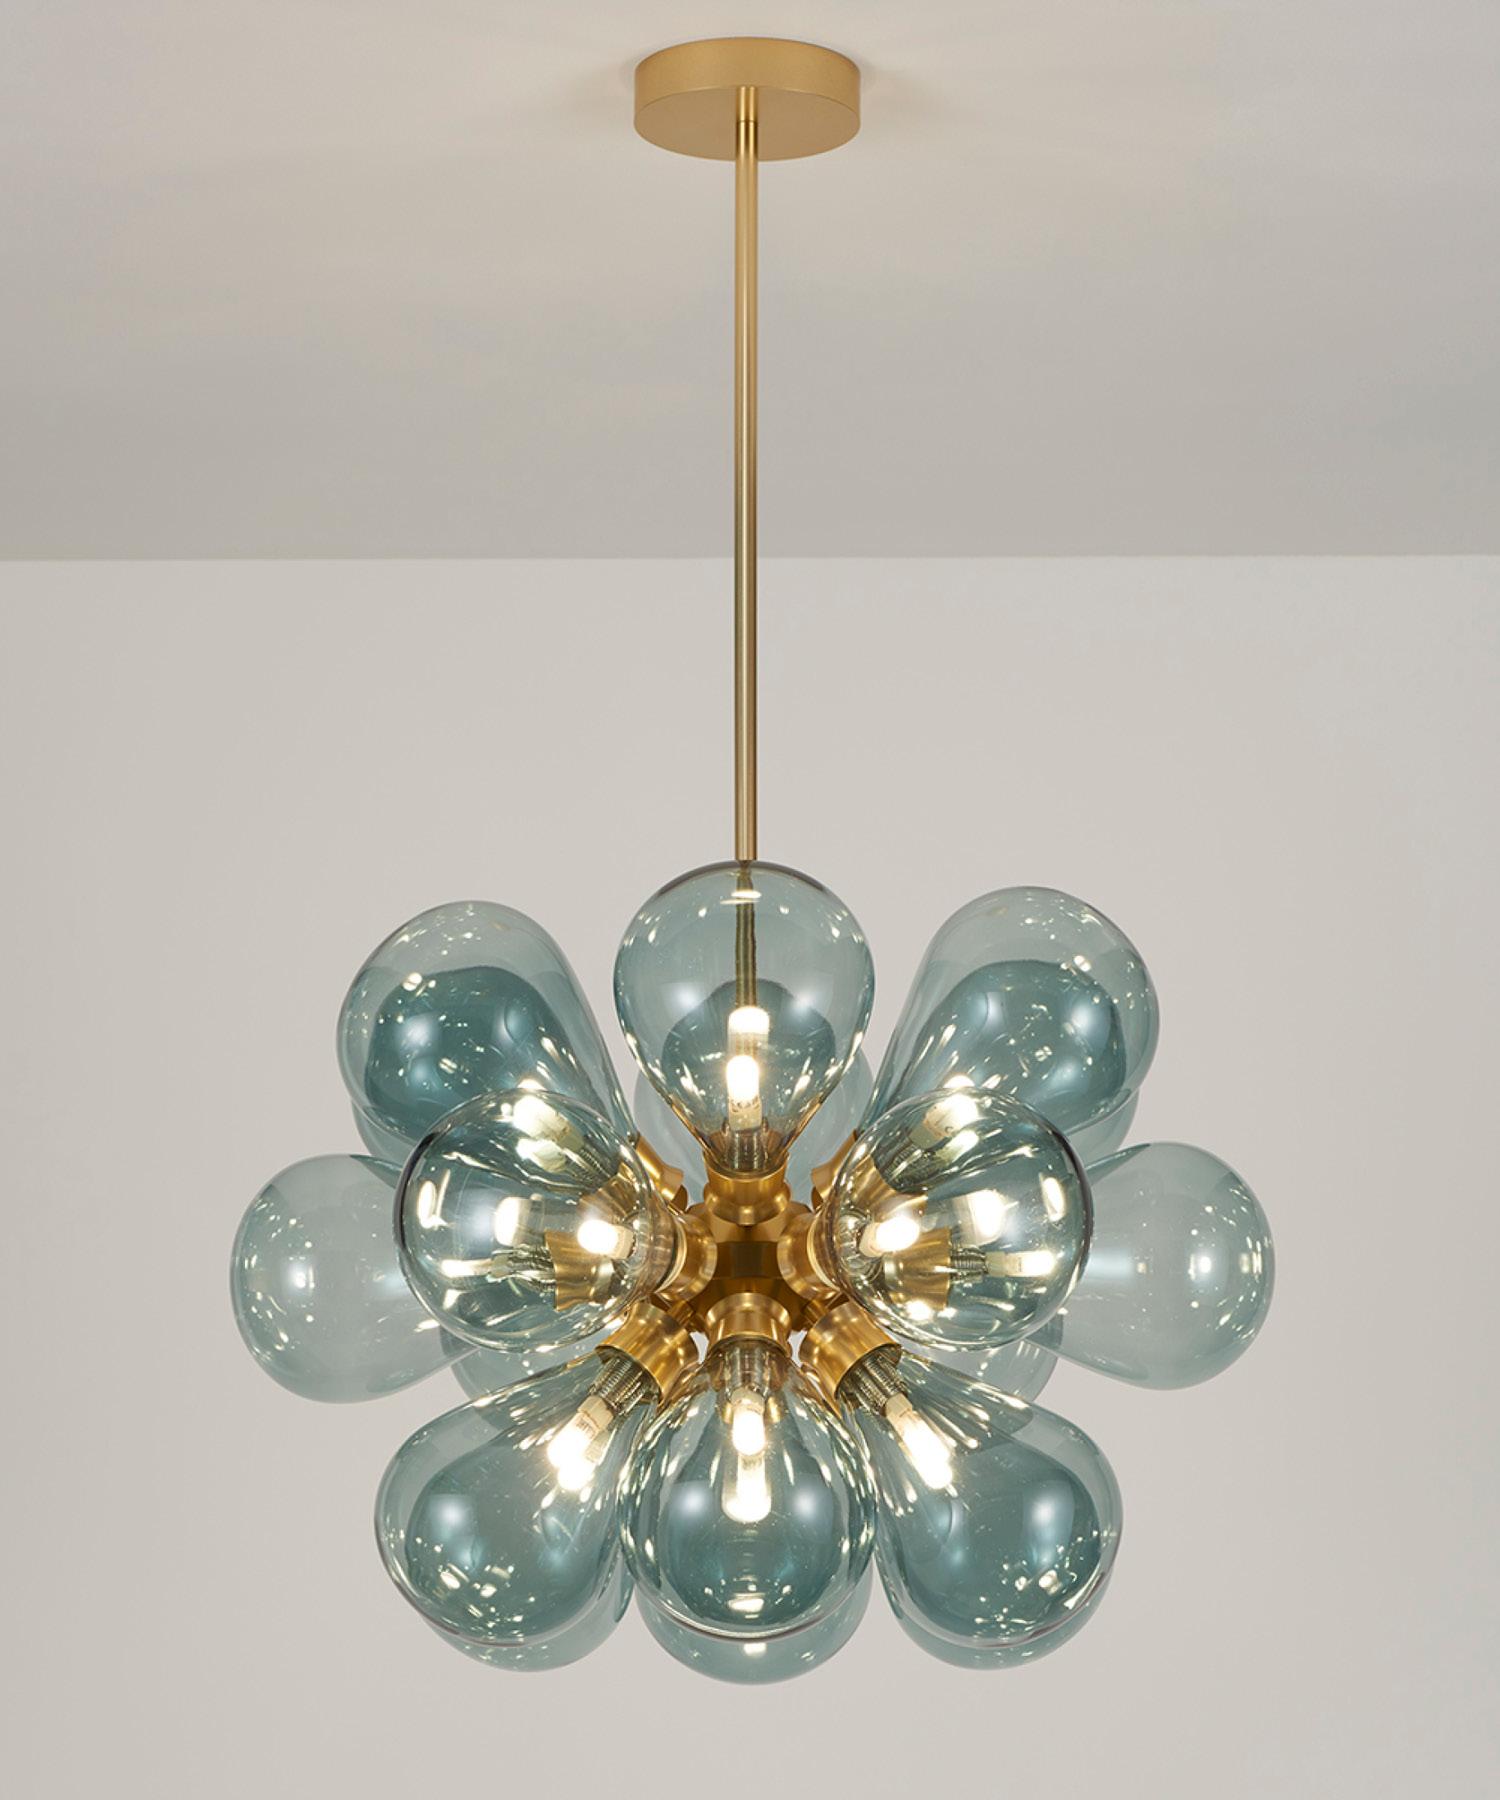 British Cintola Maxi Pendant in Satin Gold with 18 Handblown Smoke Grey Glass Globes For Sale